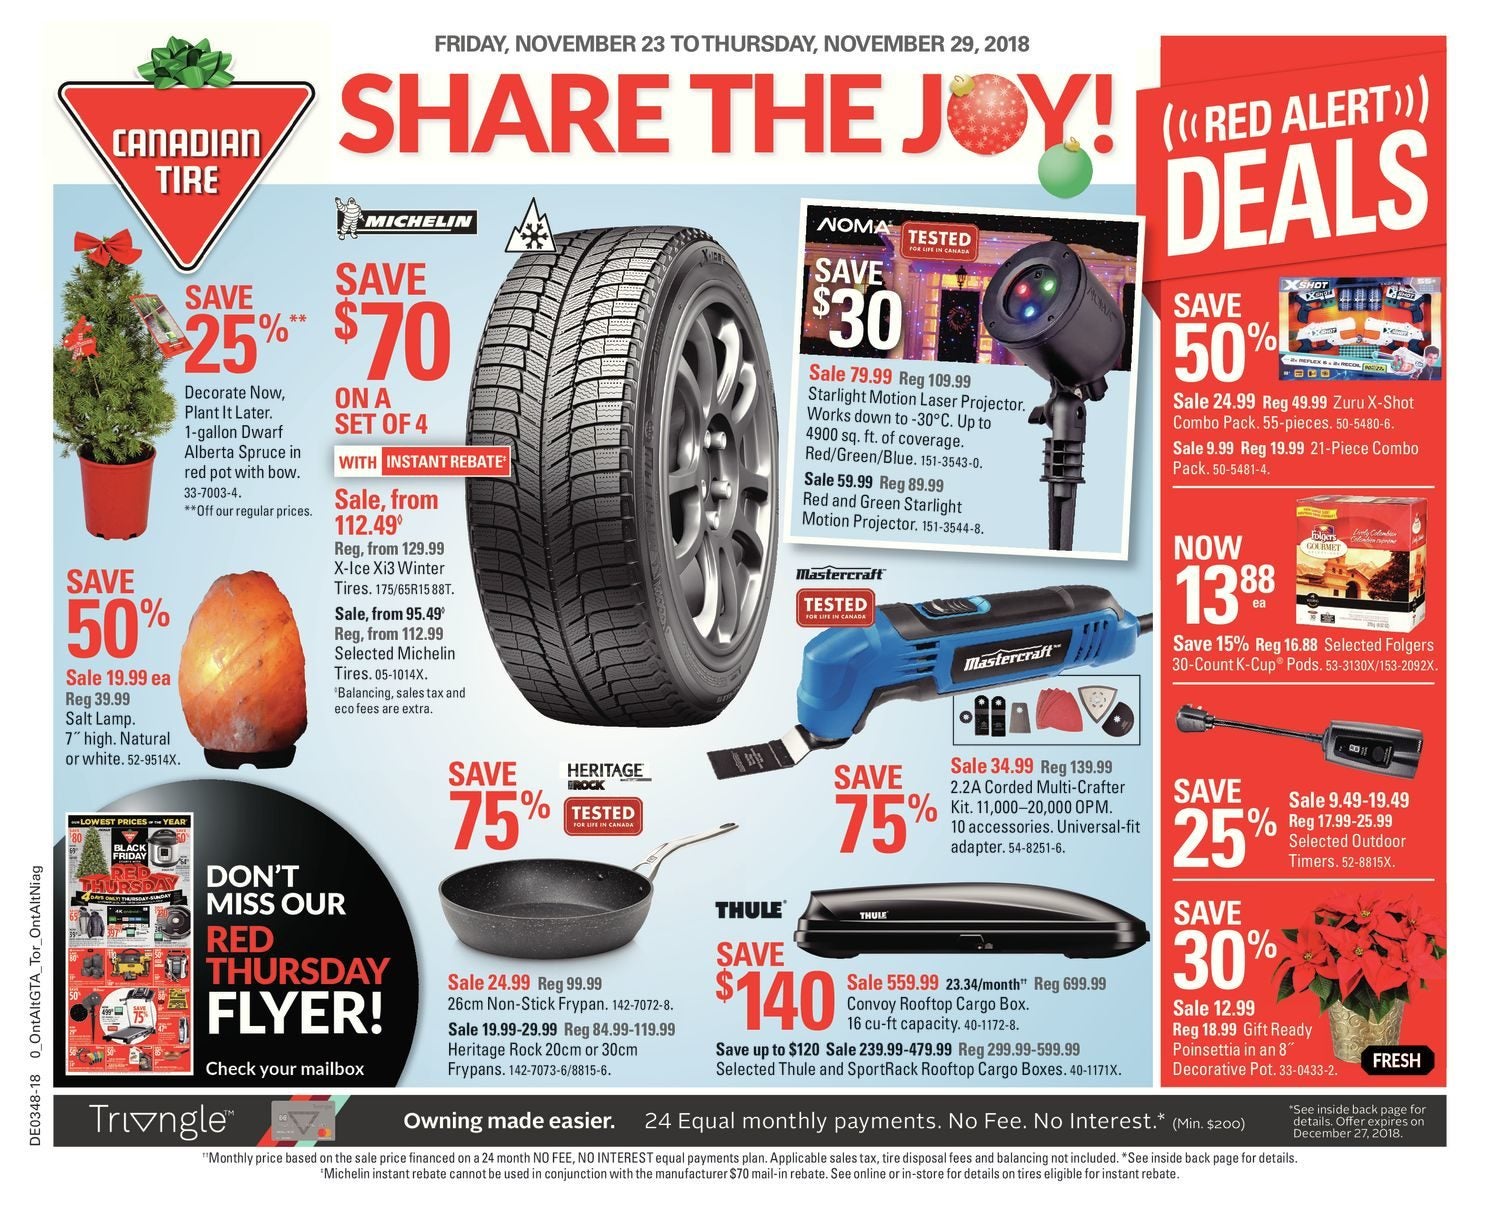 Canadian Tire Weekly Flyer Weekly Share The Joy Nov 23 29